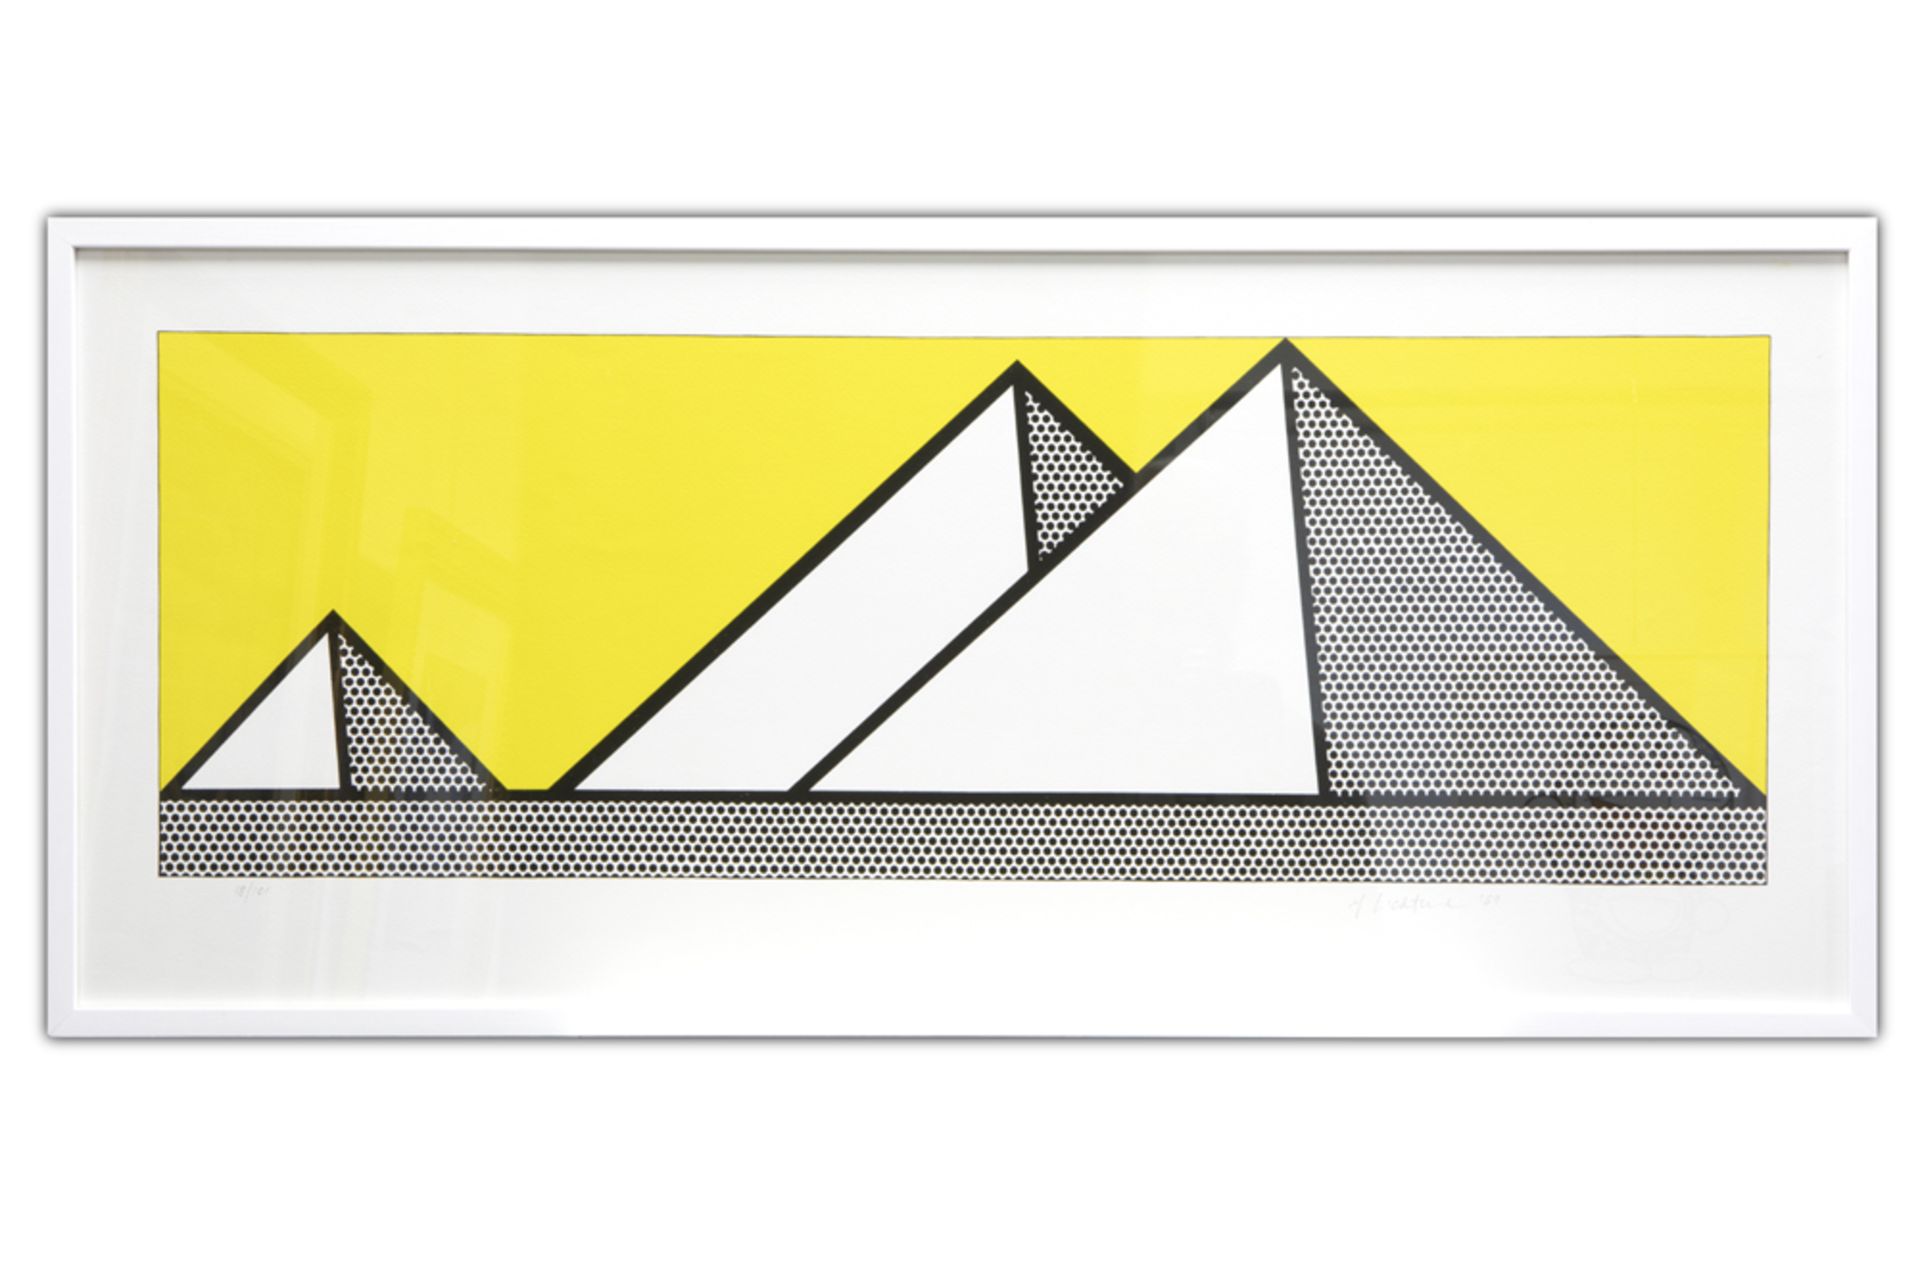 Roy Lichtenstein "Pyramids" lithograph printed in colors on Arches - signed and dated (19)69 || - Image 3 of 3